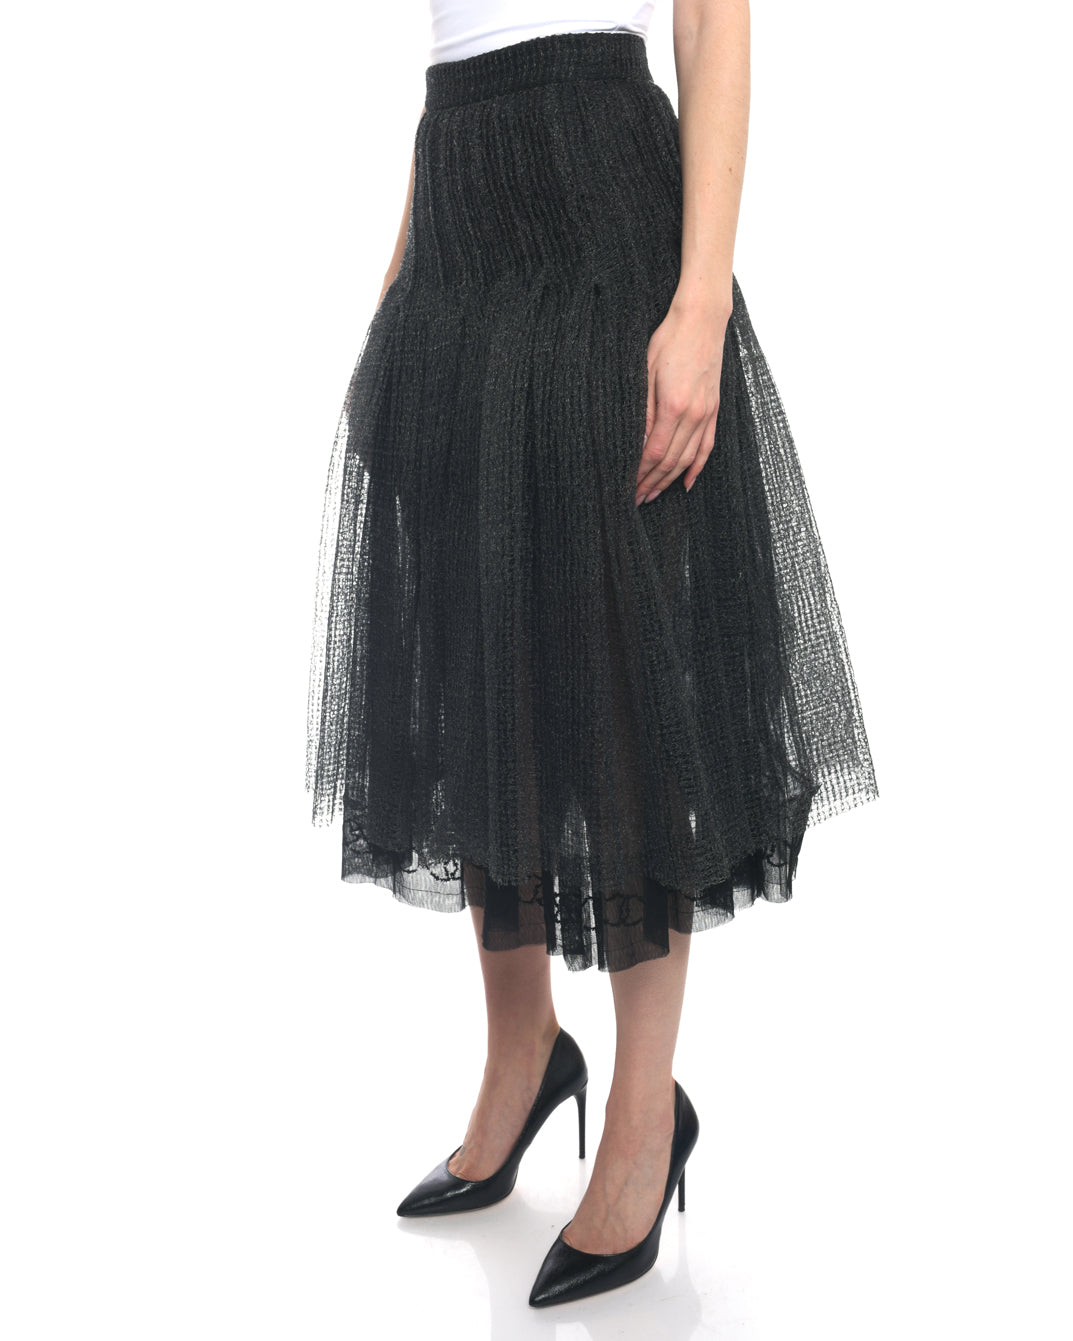 Chanel 11P Black Mesh Tulle Midi Skirt with CC Embroidery - 4 – I MISS ...